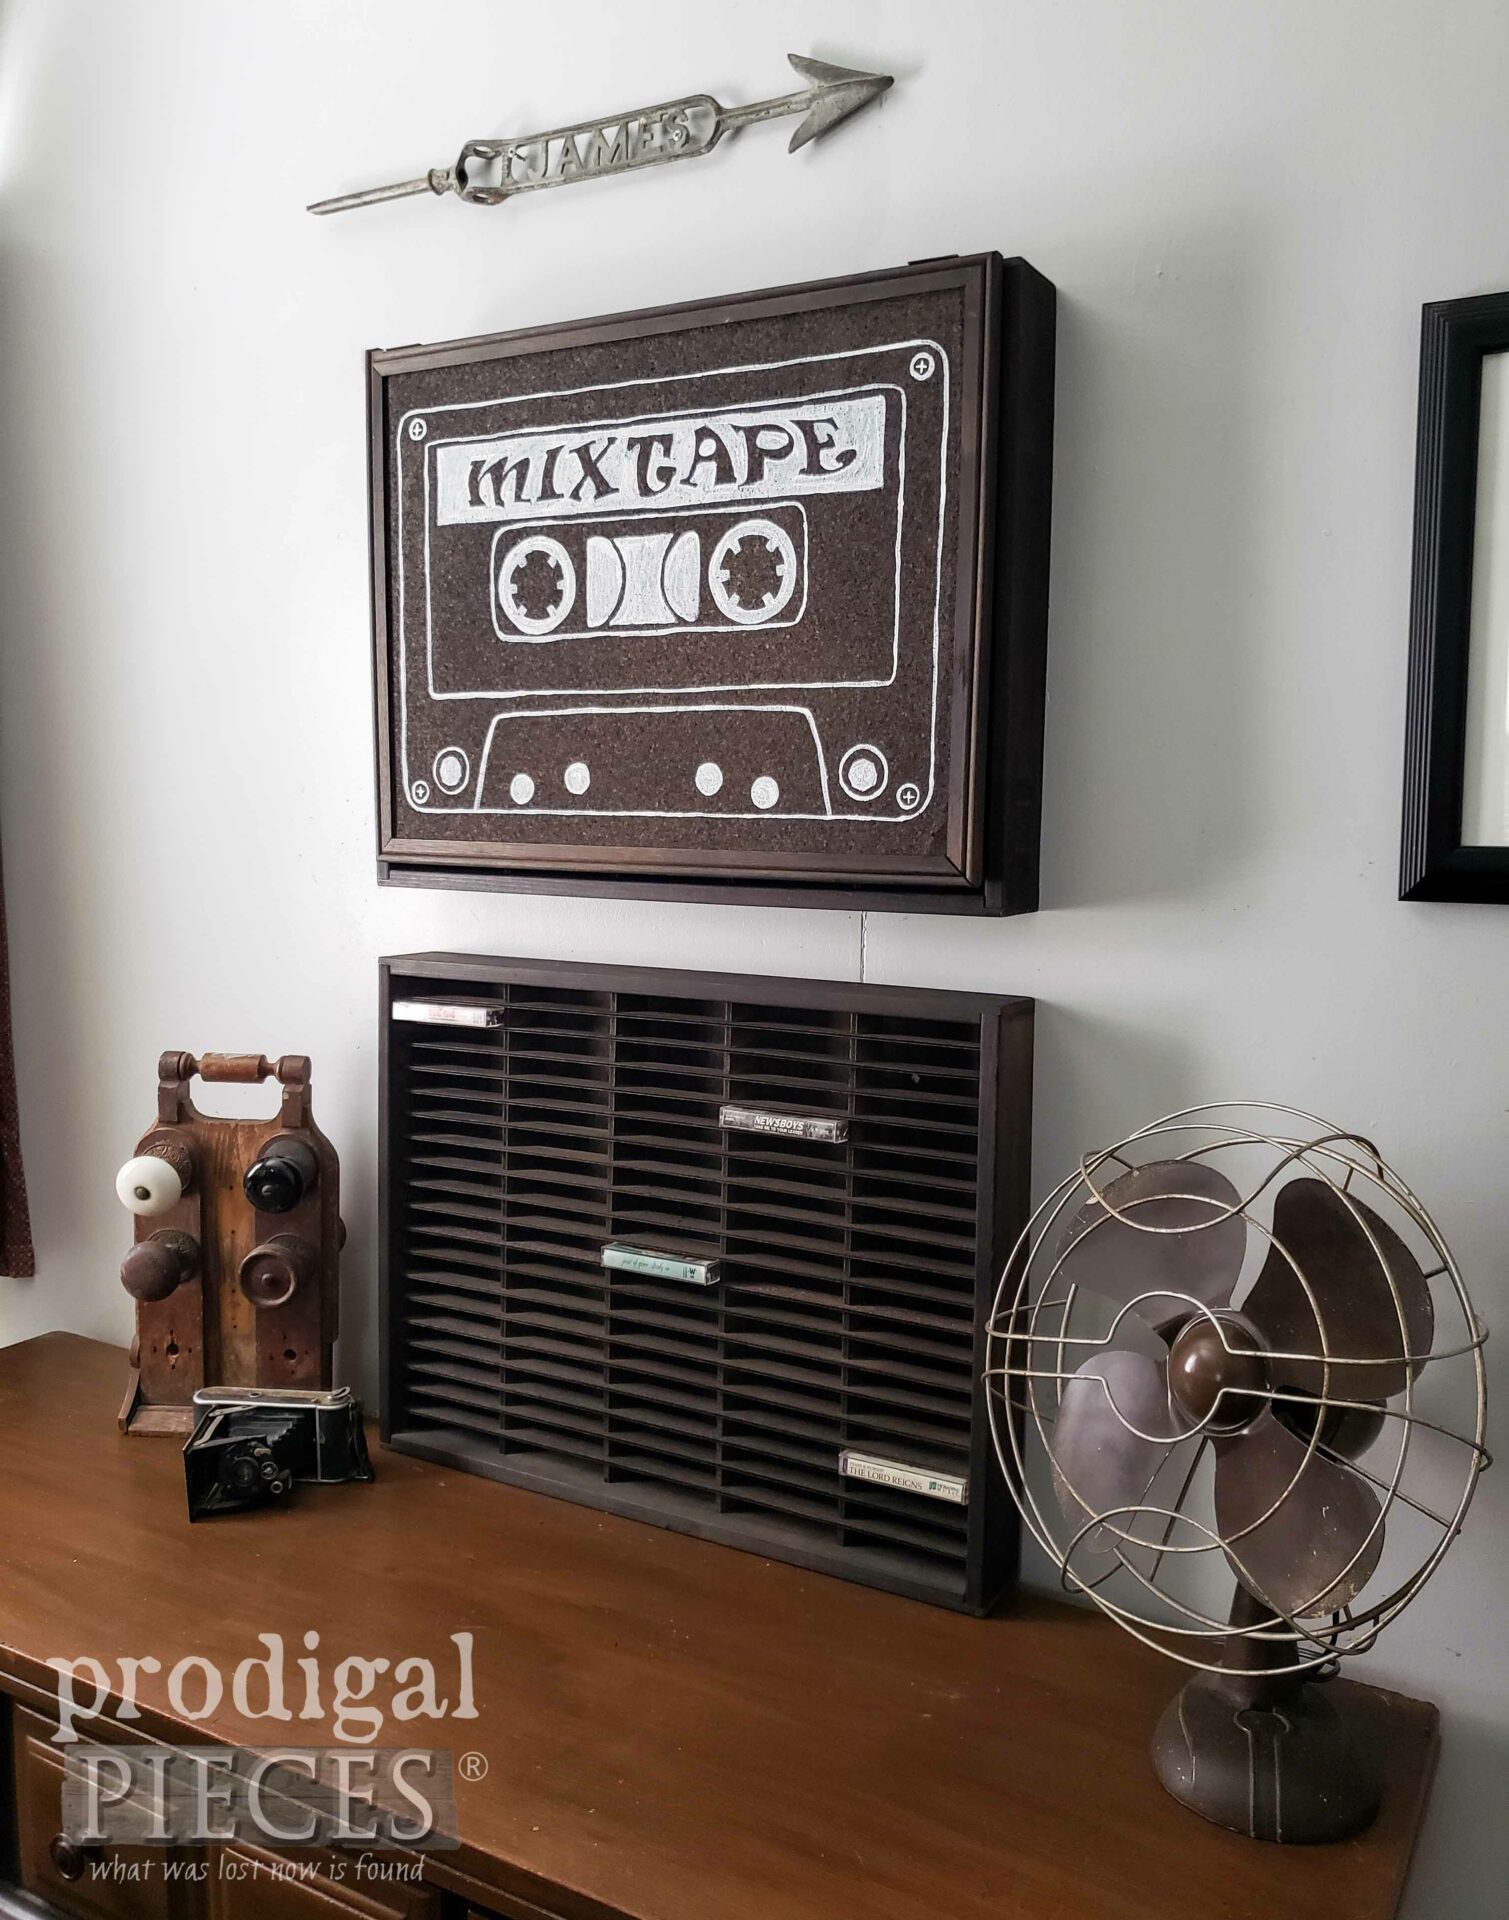 Vintage Eclectic Decor with Cassette Tape Holders by Larissa of Prodigal Pieces | prodigalpieces.com #prodigalpieces #vintage #music